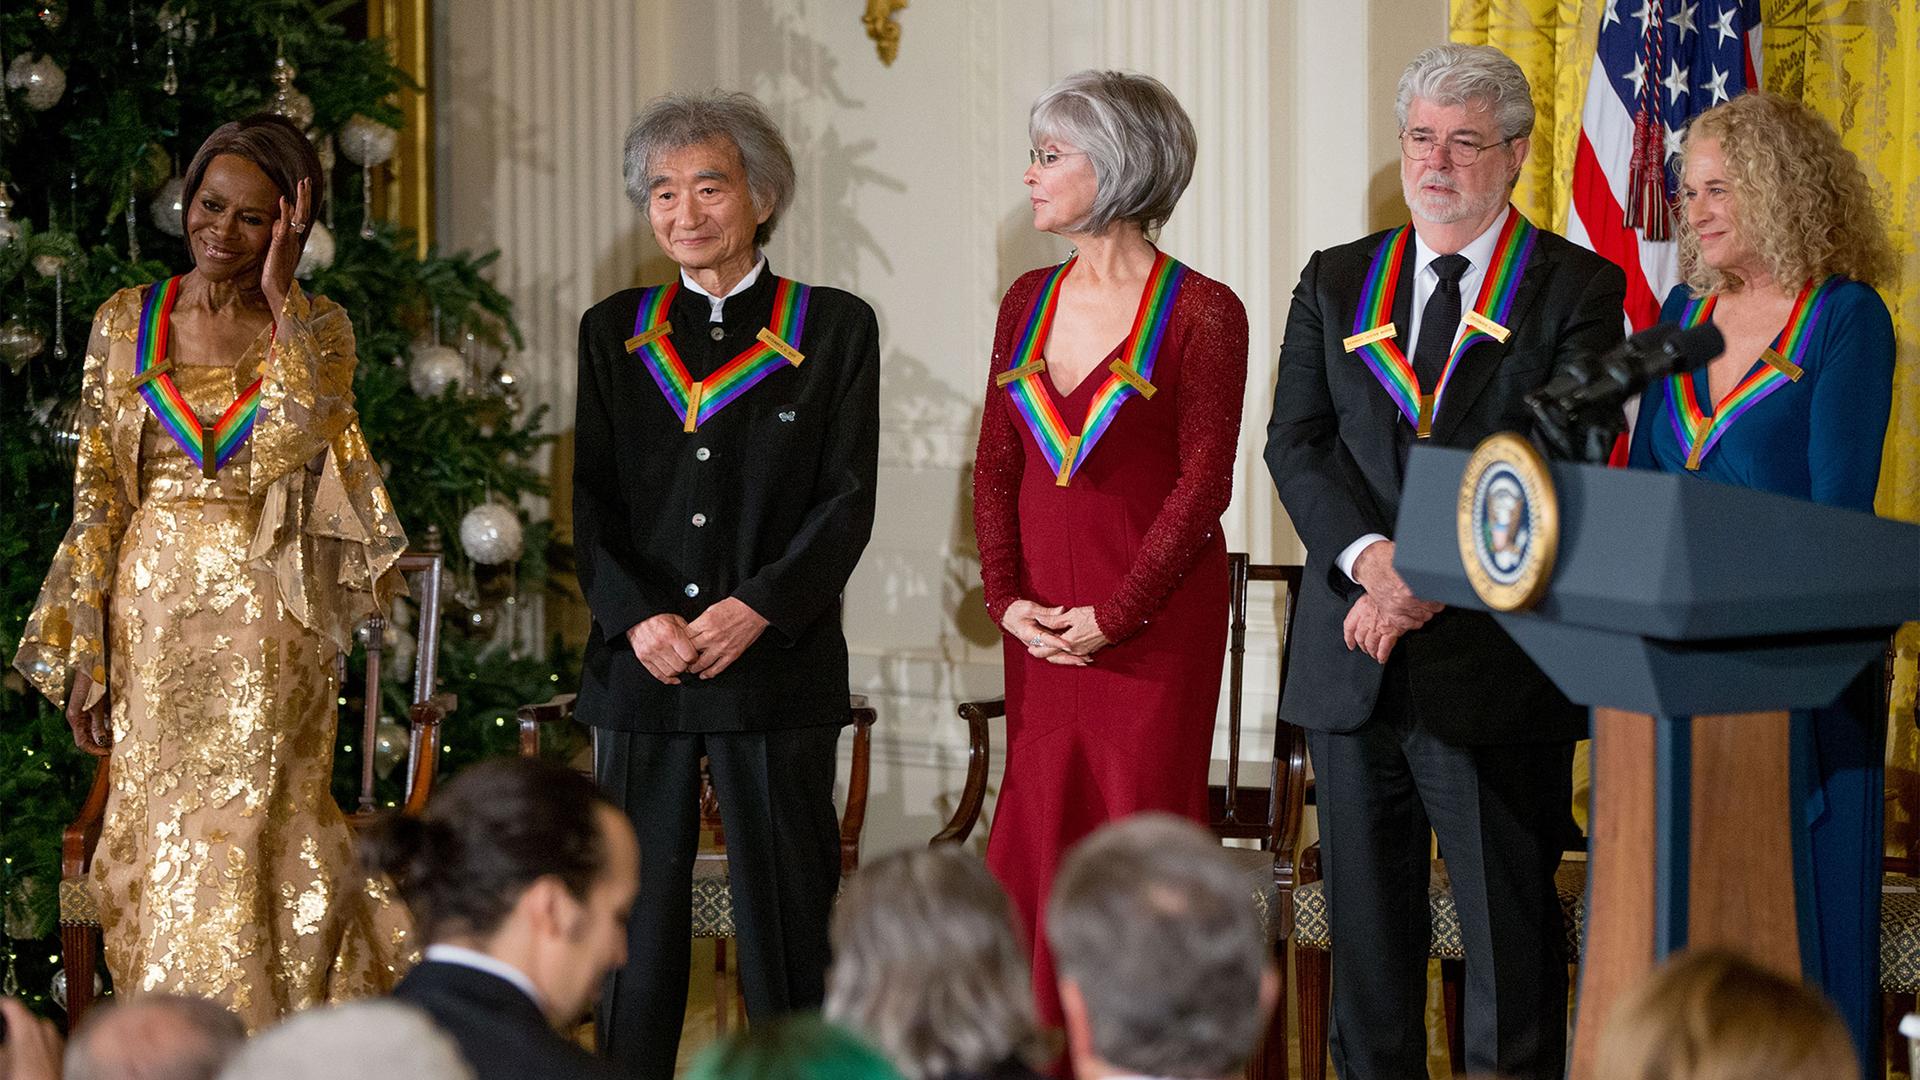 The 2015 Kennedy Center Honors Honorees, including conductor Seiji Ozawa, stand on stage during a reception for them in the East Room of the White House, Dec. 6, 2015.